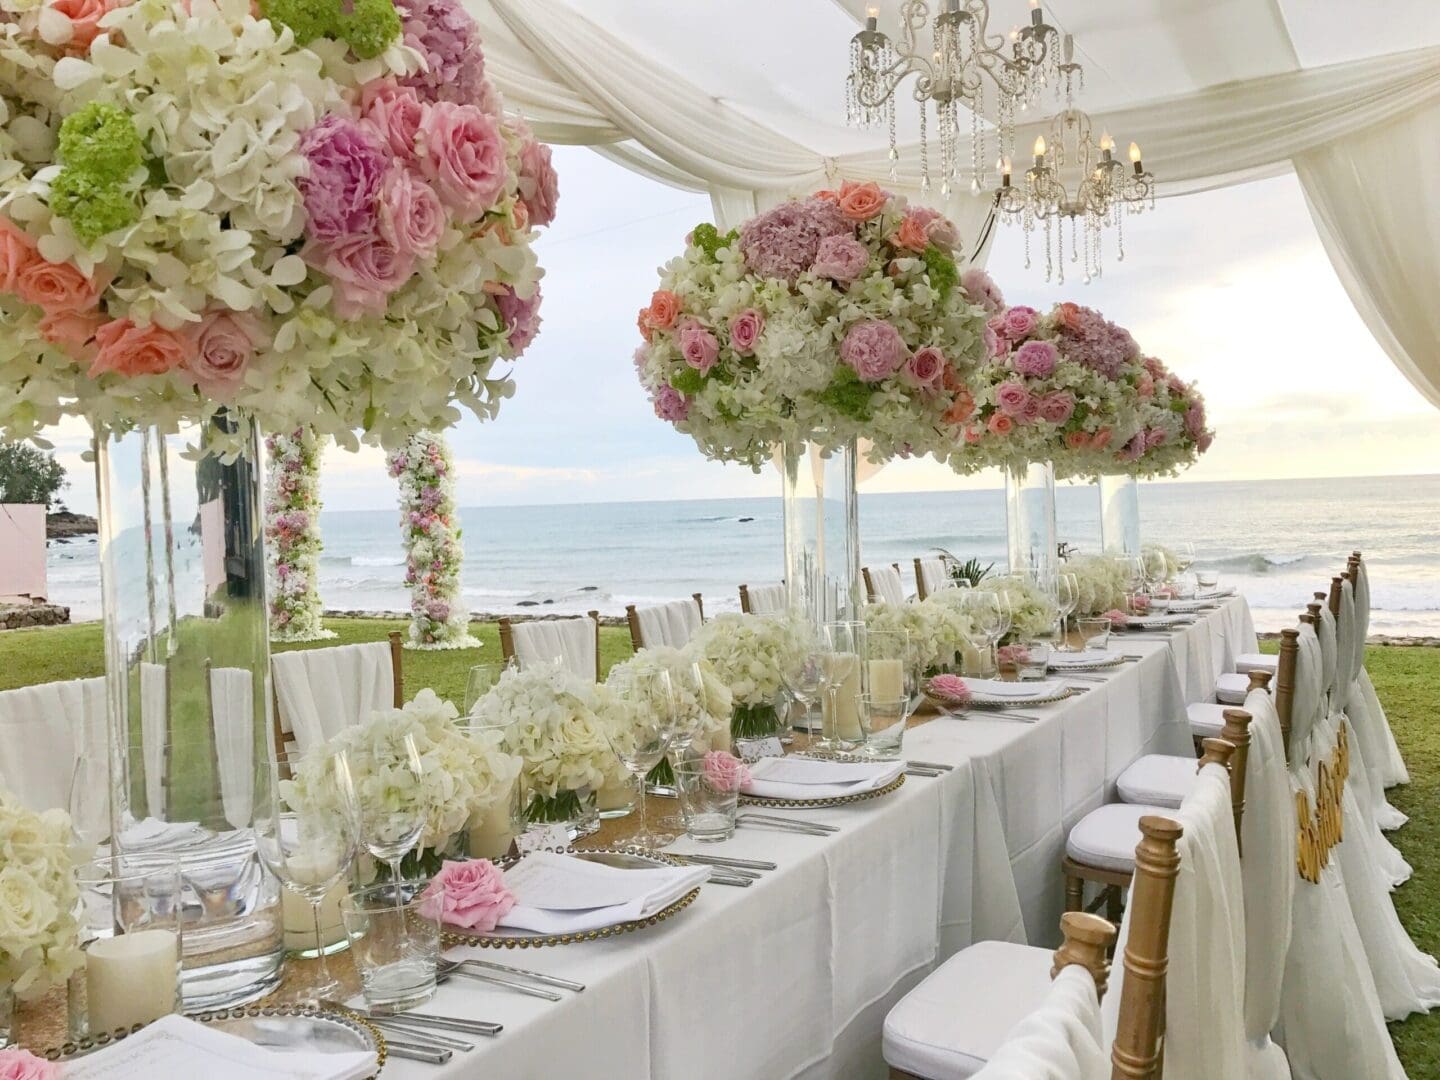 A wedding reception set up with white and pink flowers. Featuring elegant wedding table scape ideas.